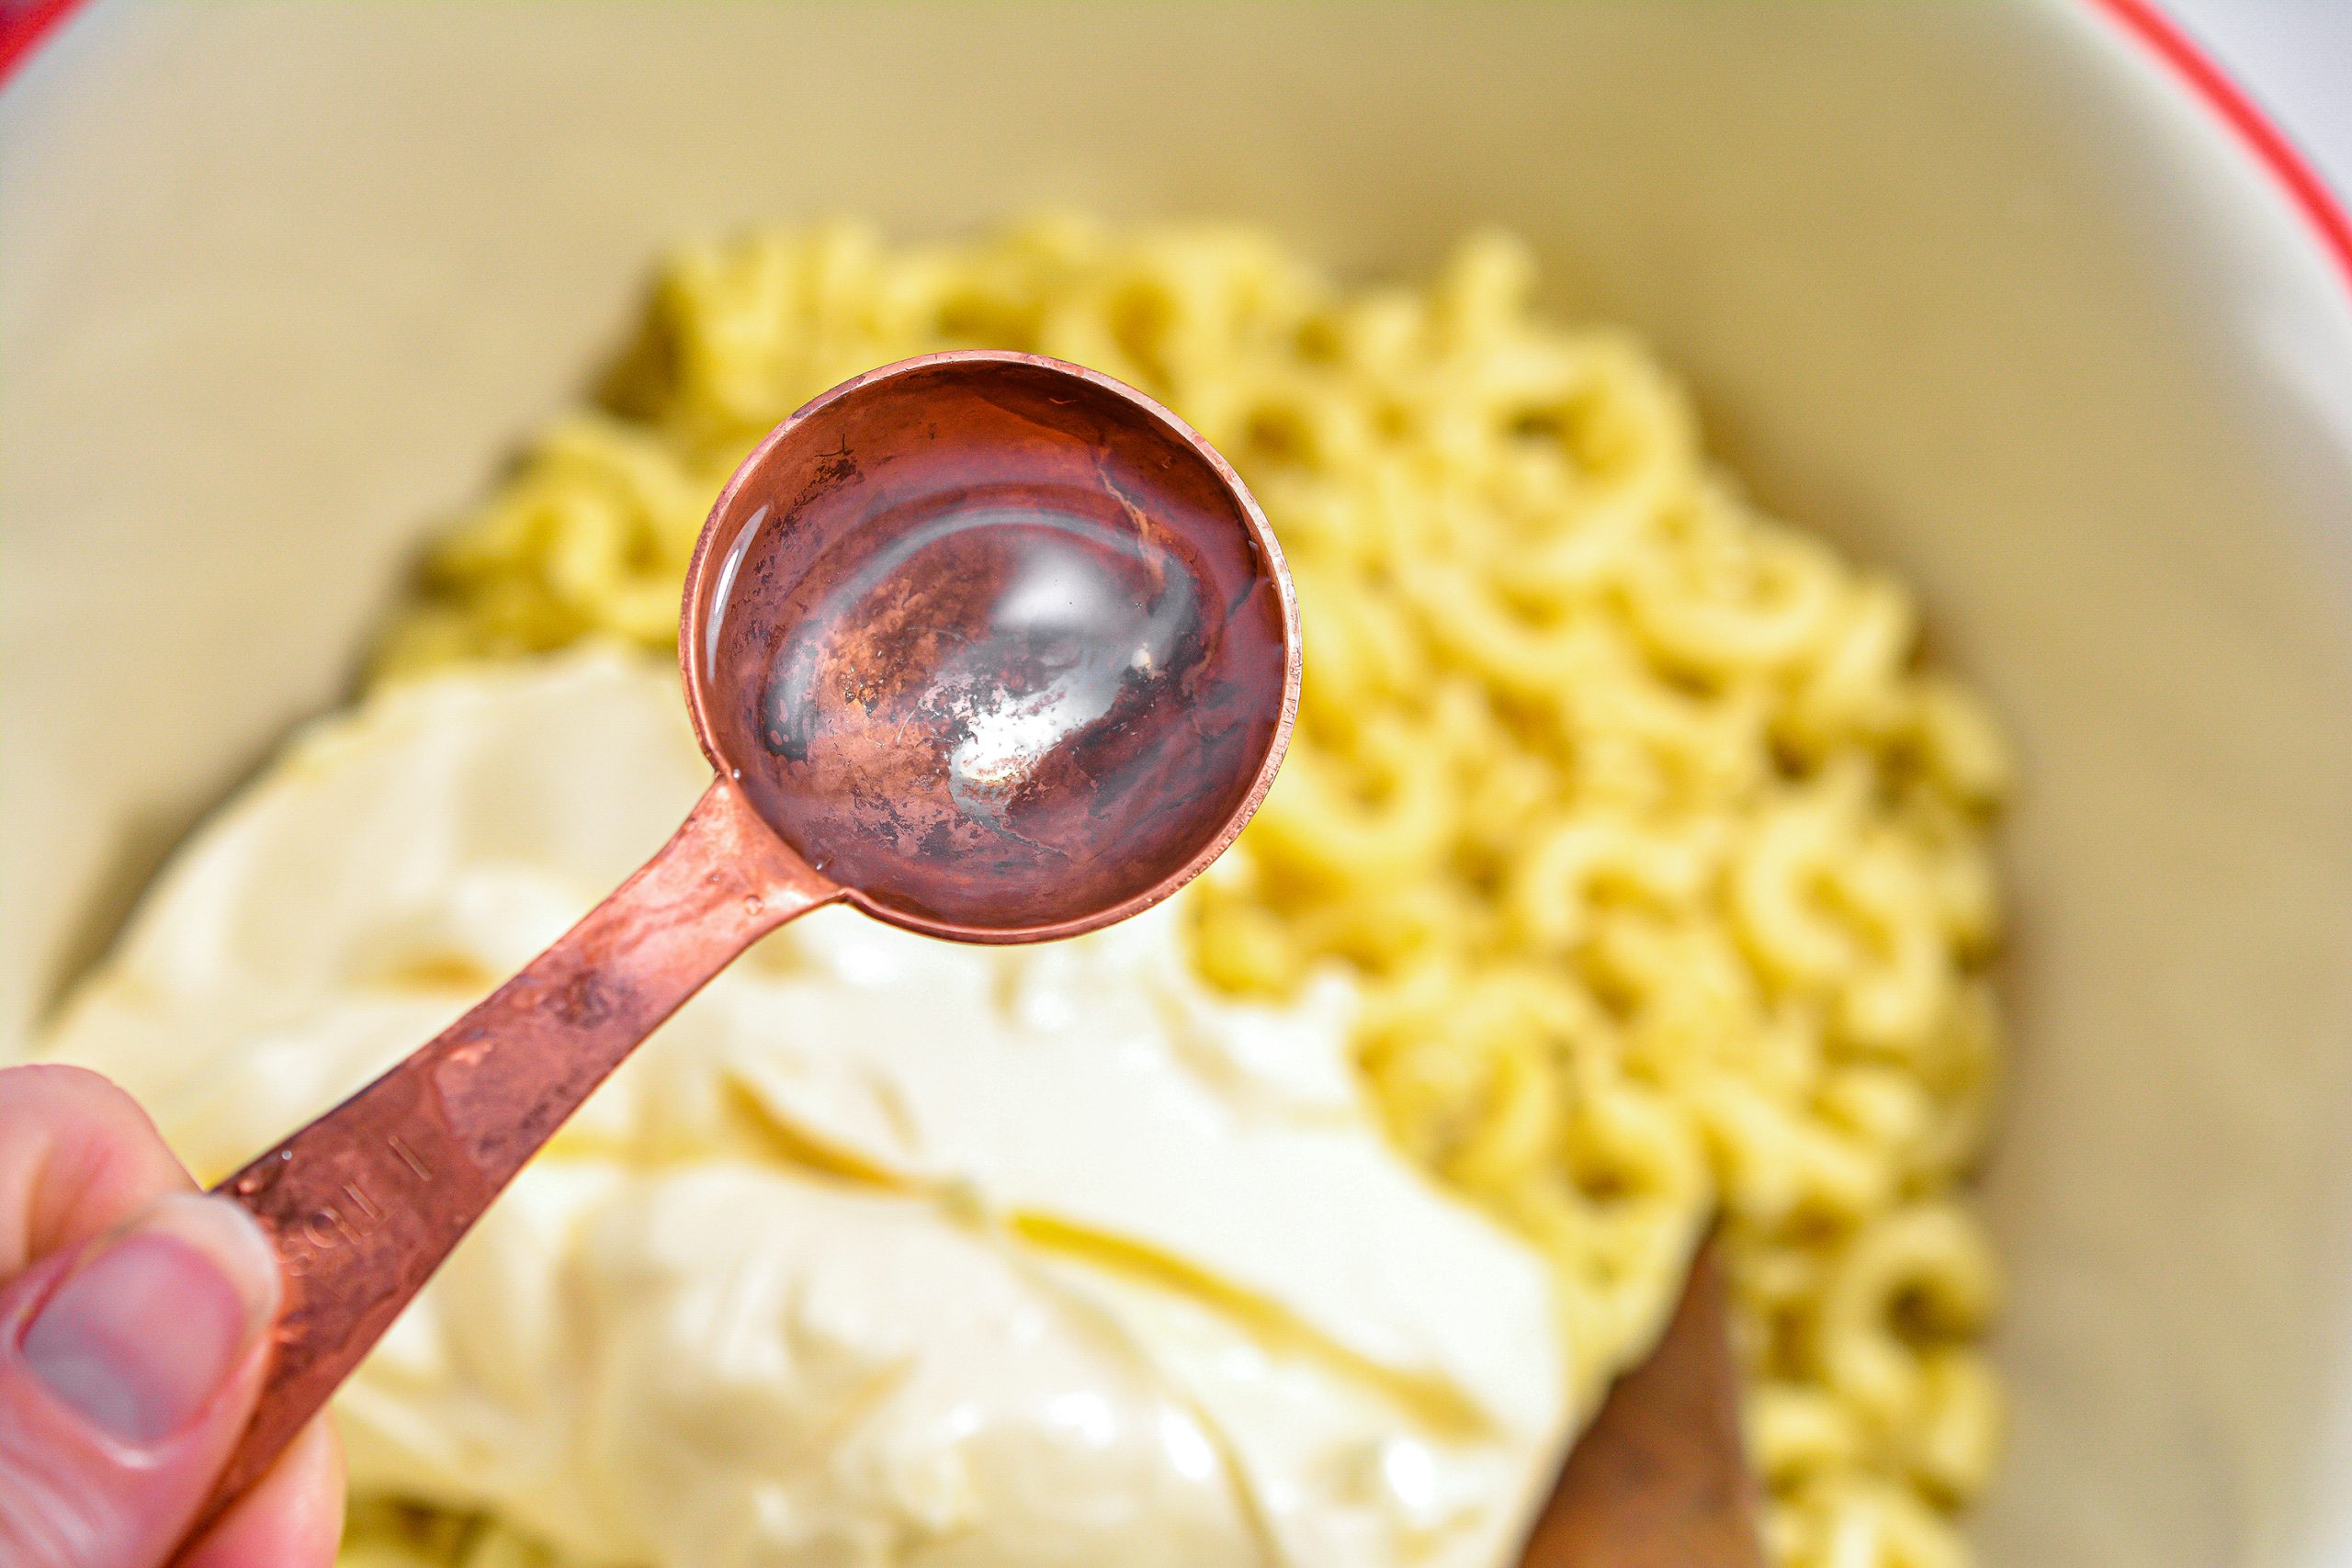 Place the noodles into a large mixing bowl and add in the remaining ingredients. Stir to combine well.